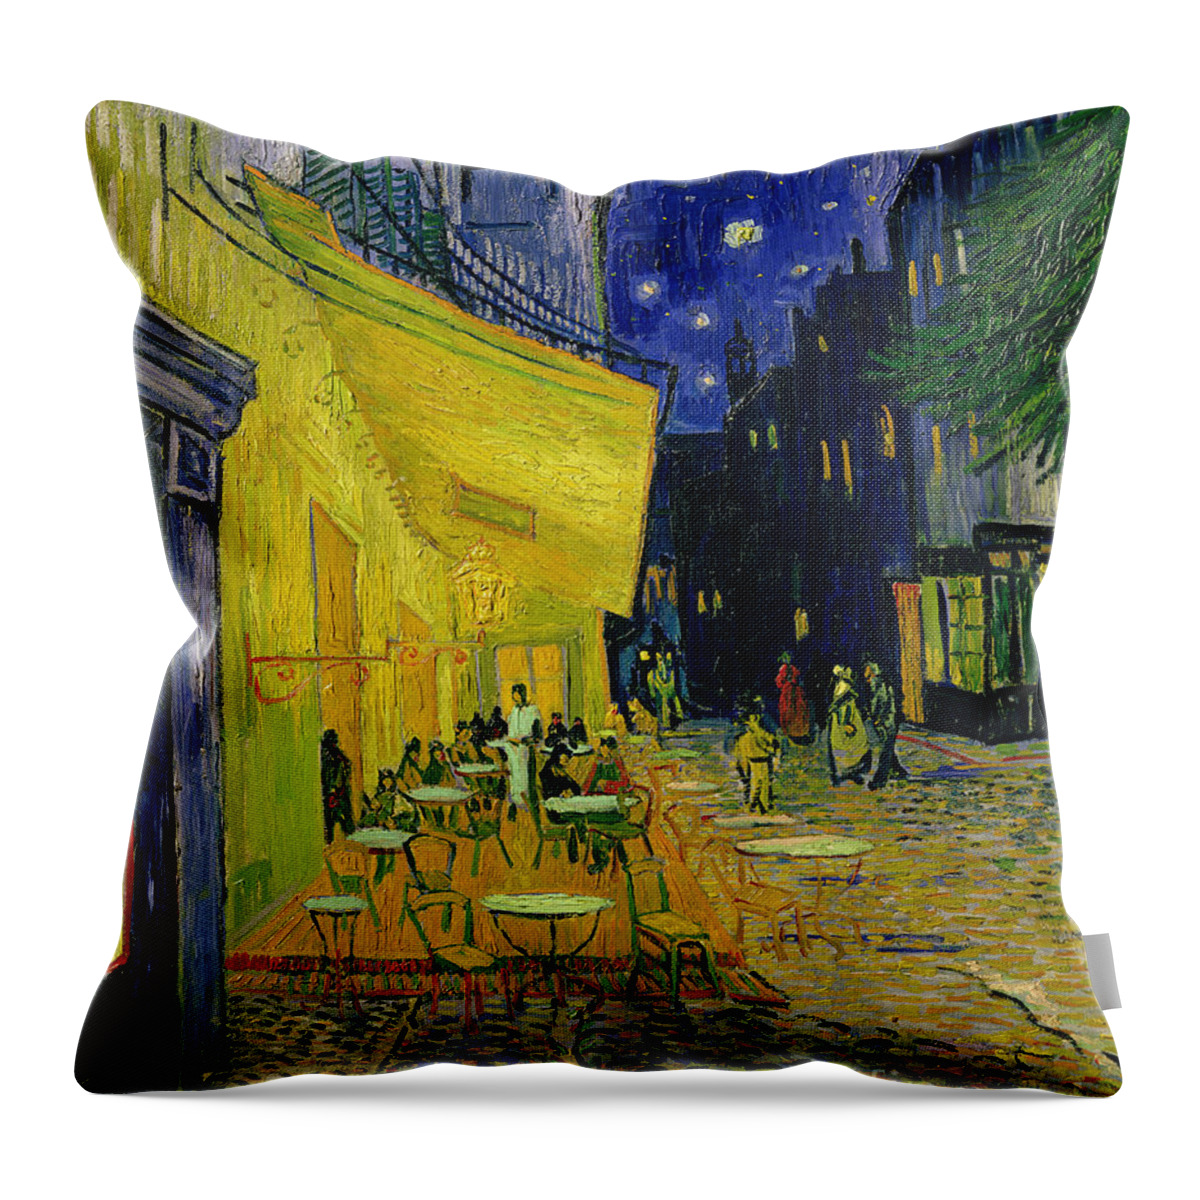 #faatoppicks Throw Pillow featuring the painting Cafe Terrace Arles by Vincent van Gogh